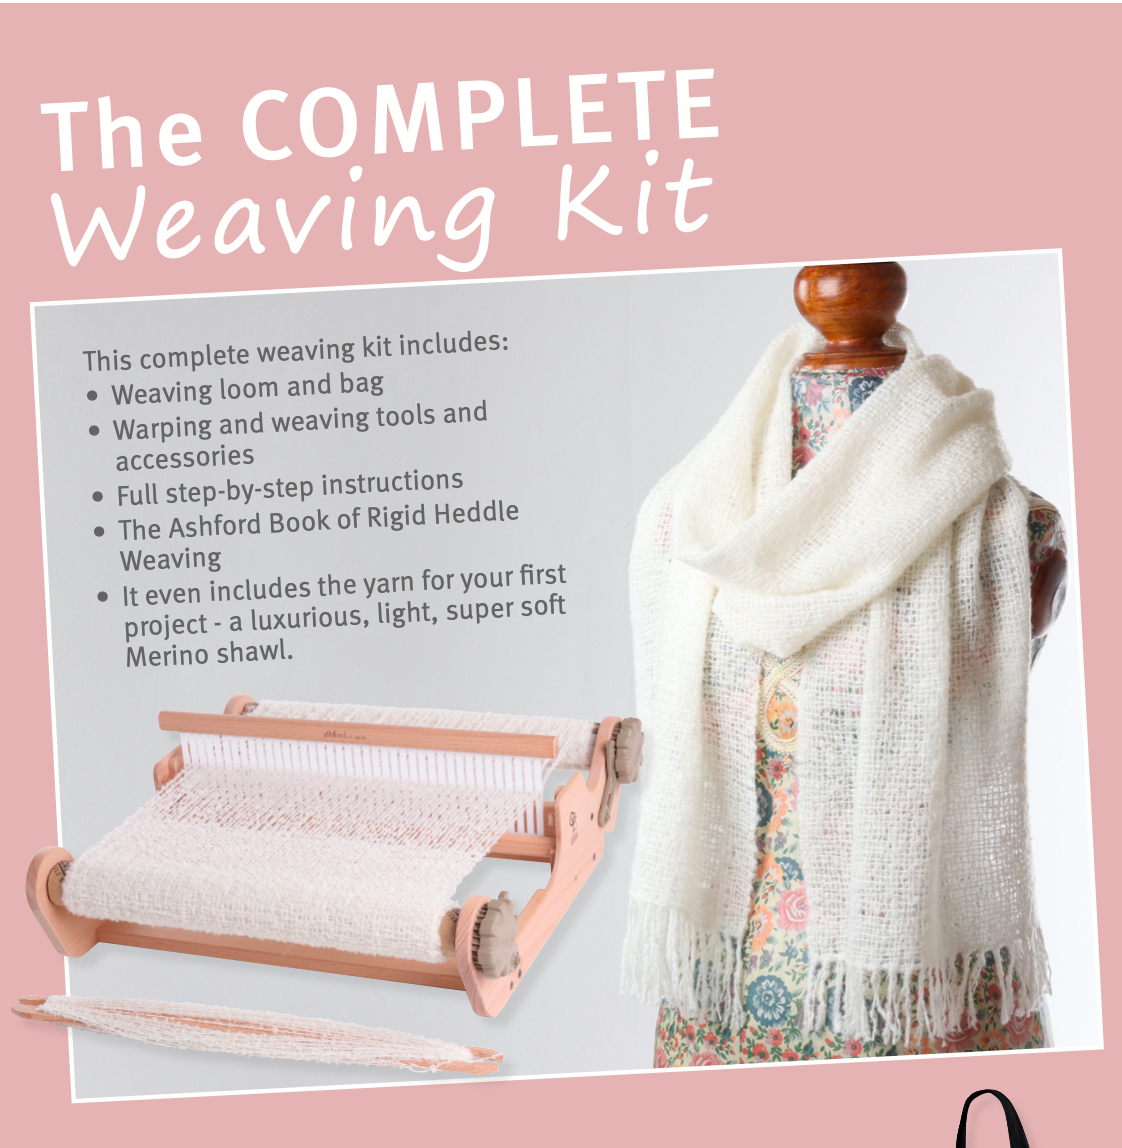 27 Free Knit Poncho Patterns for All Seasons - Sarah Maker